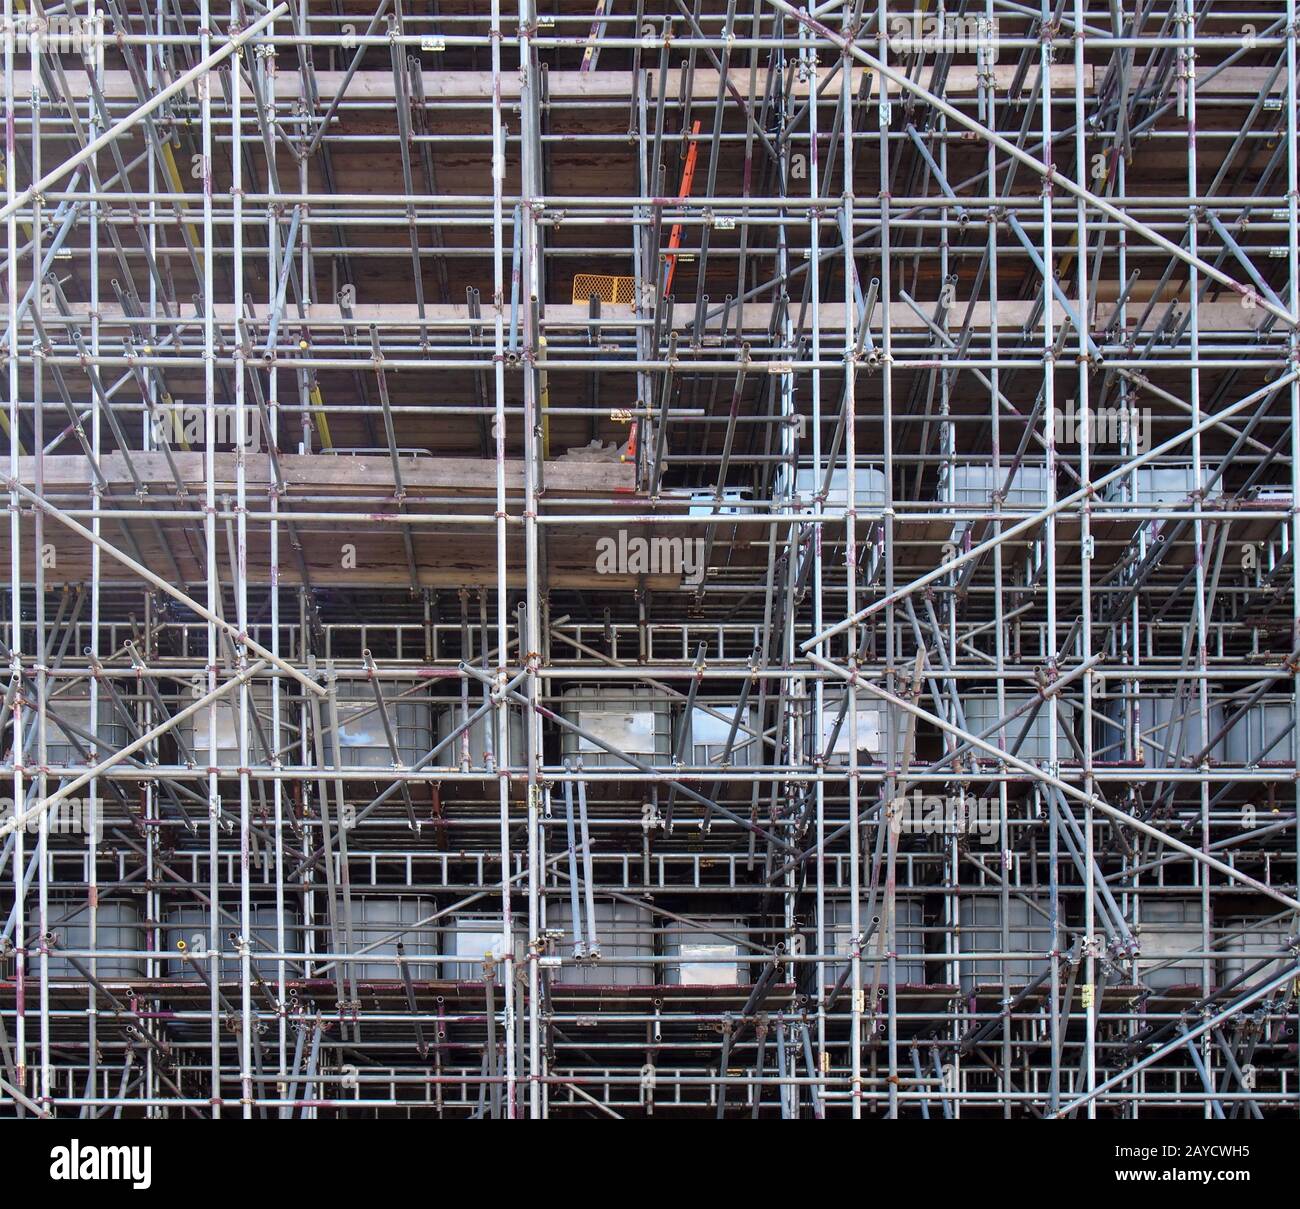 a full frame image of a network of scaffolding covering a large building under renovation Stock Photo